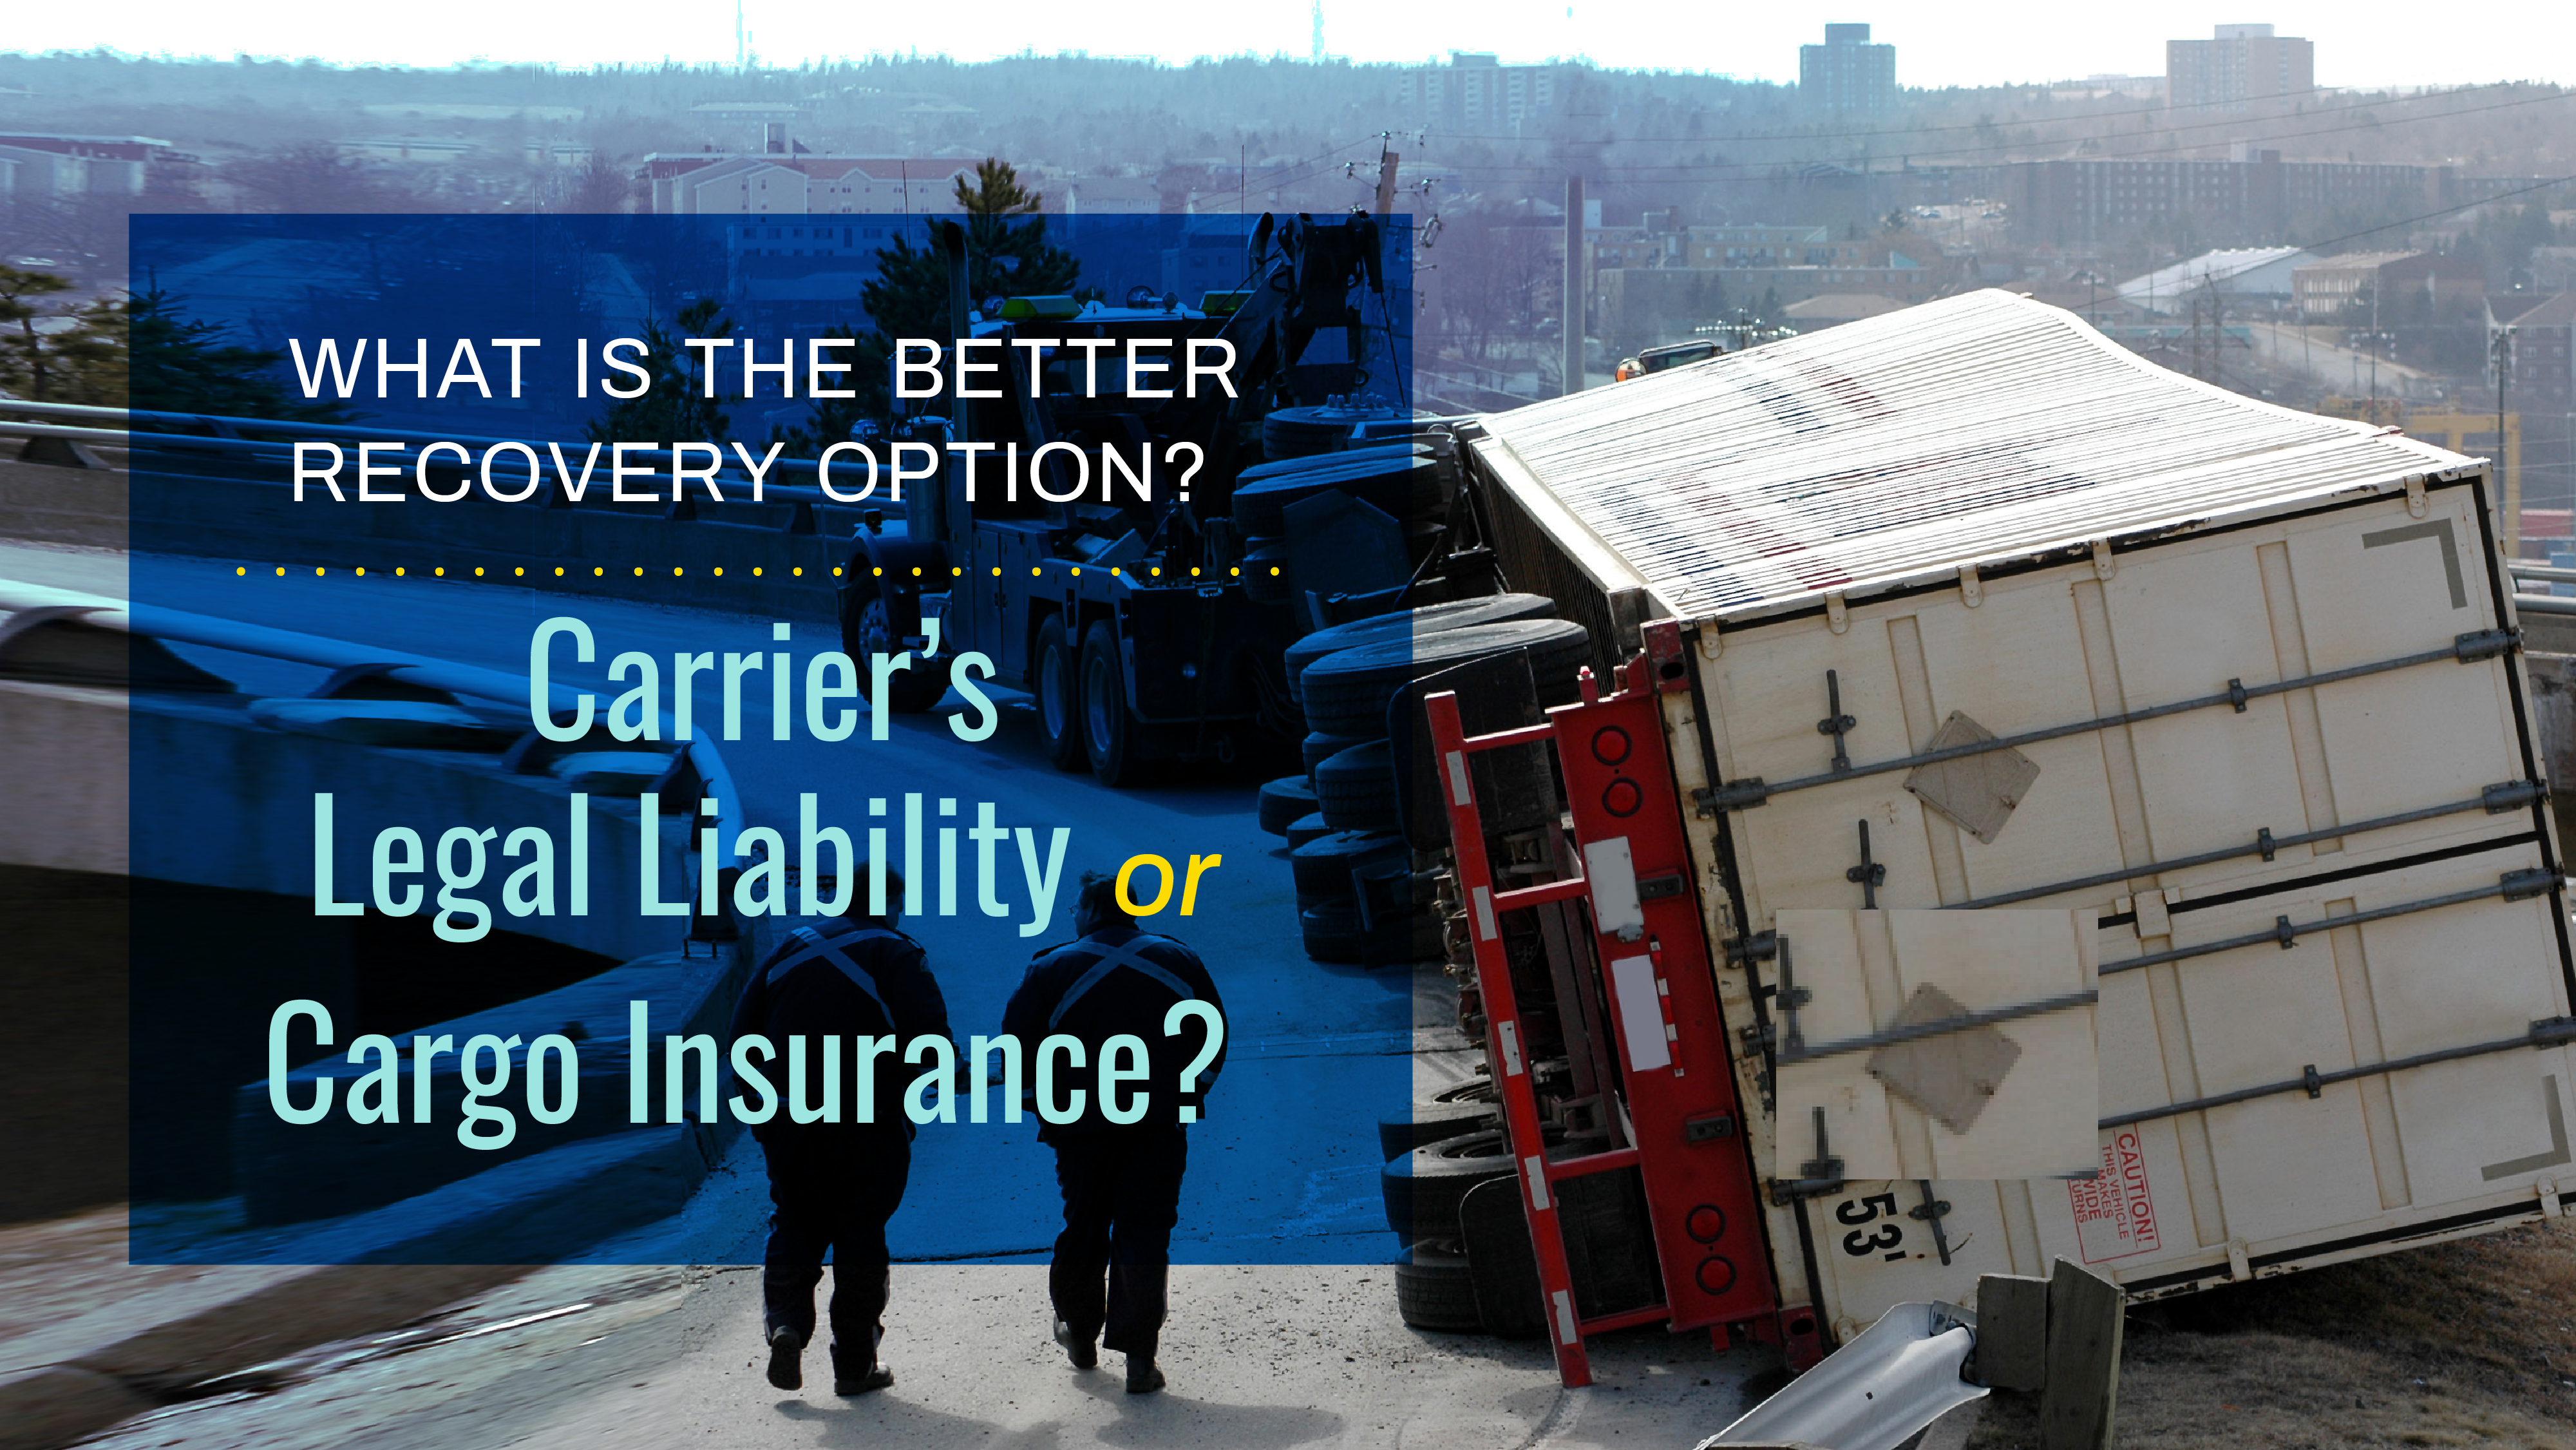 What is the better recovery option -Carrier’s Legal Liability or Cargo Insurance?